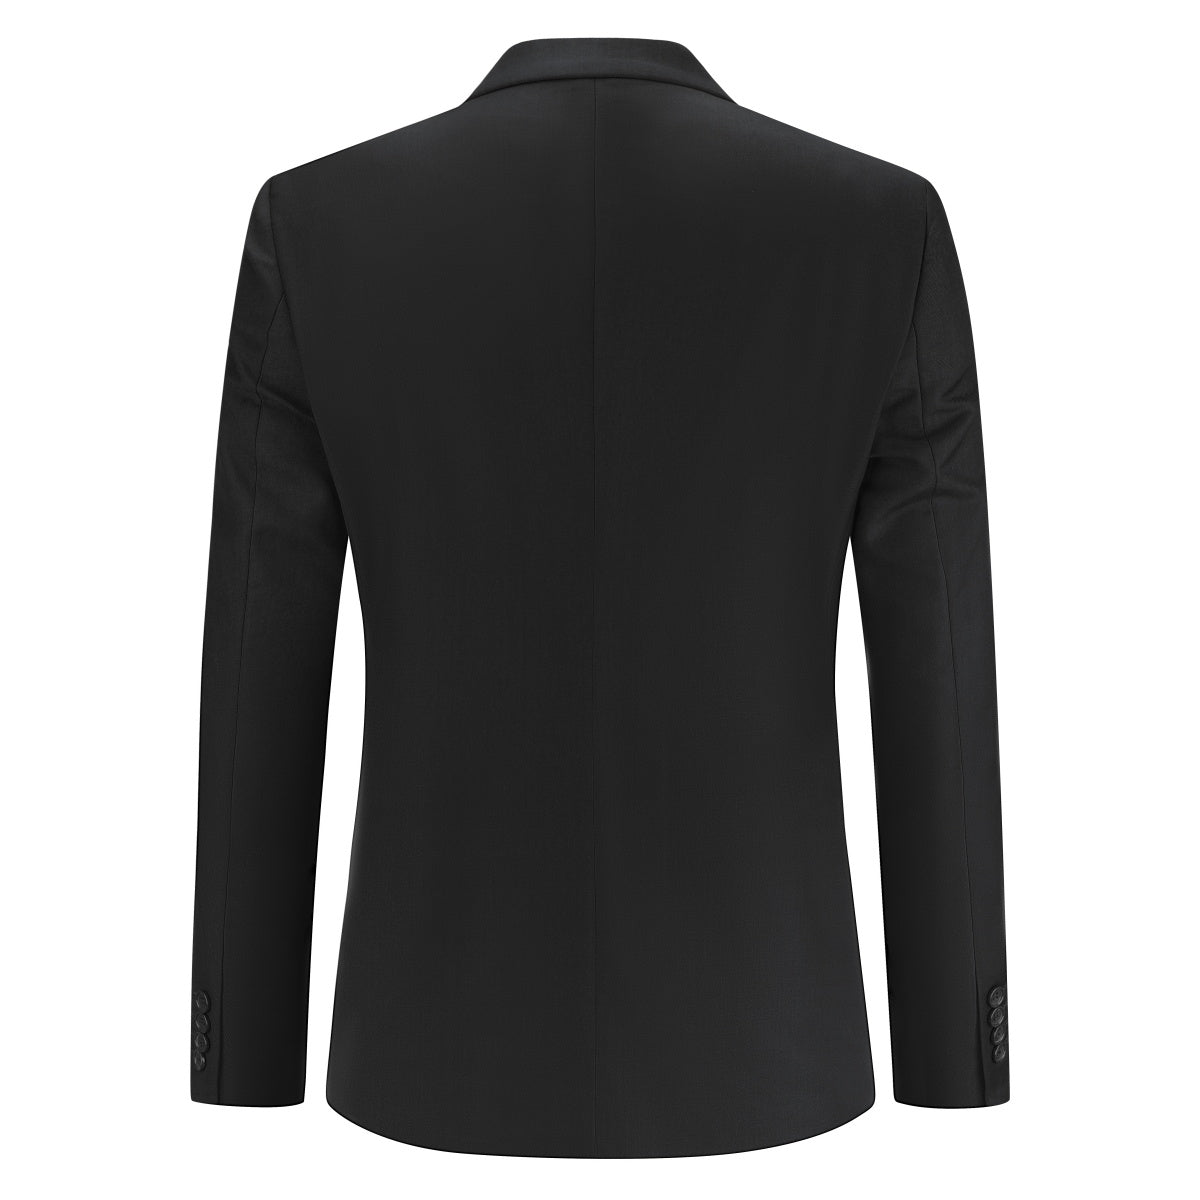 2-Piece Double Breasted Solid Color Black Suit